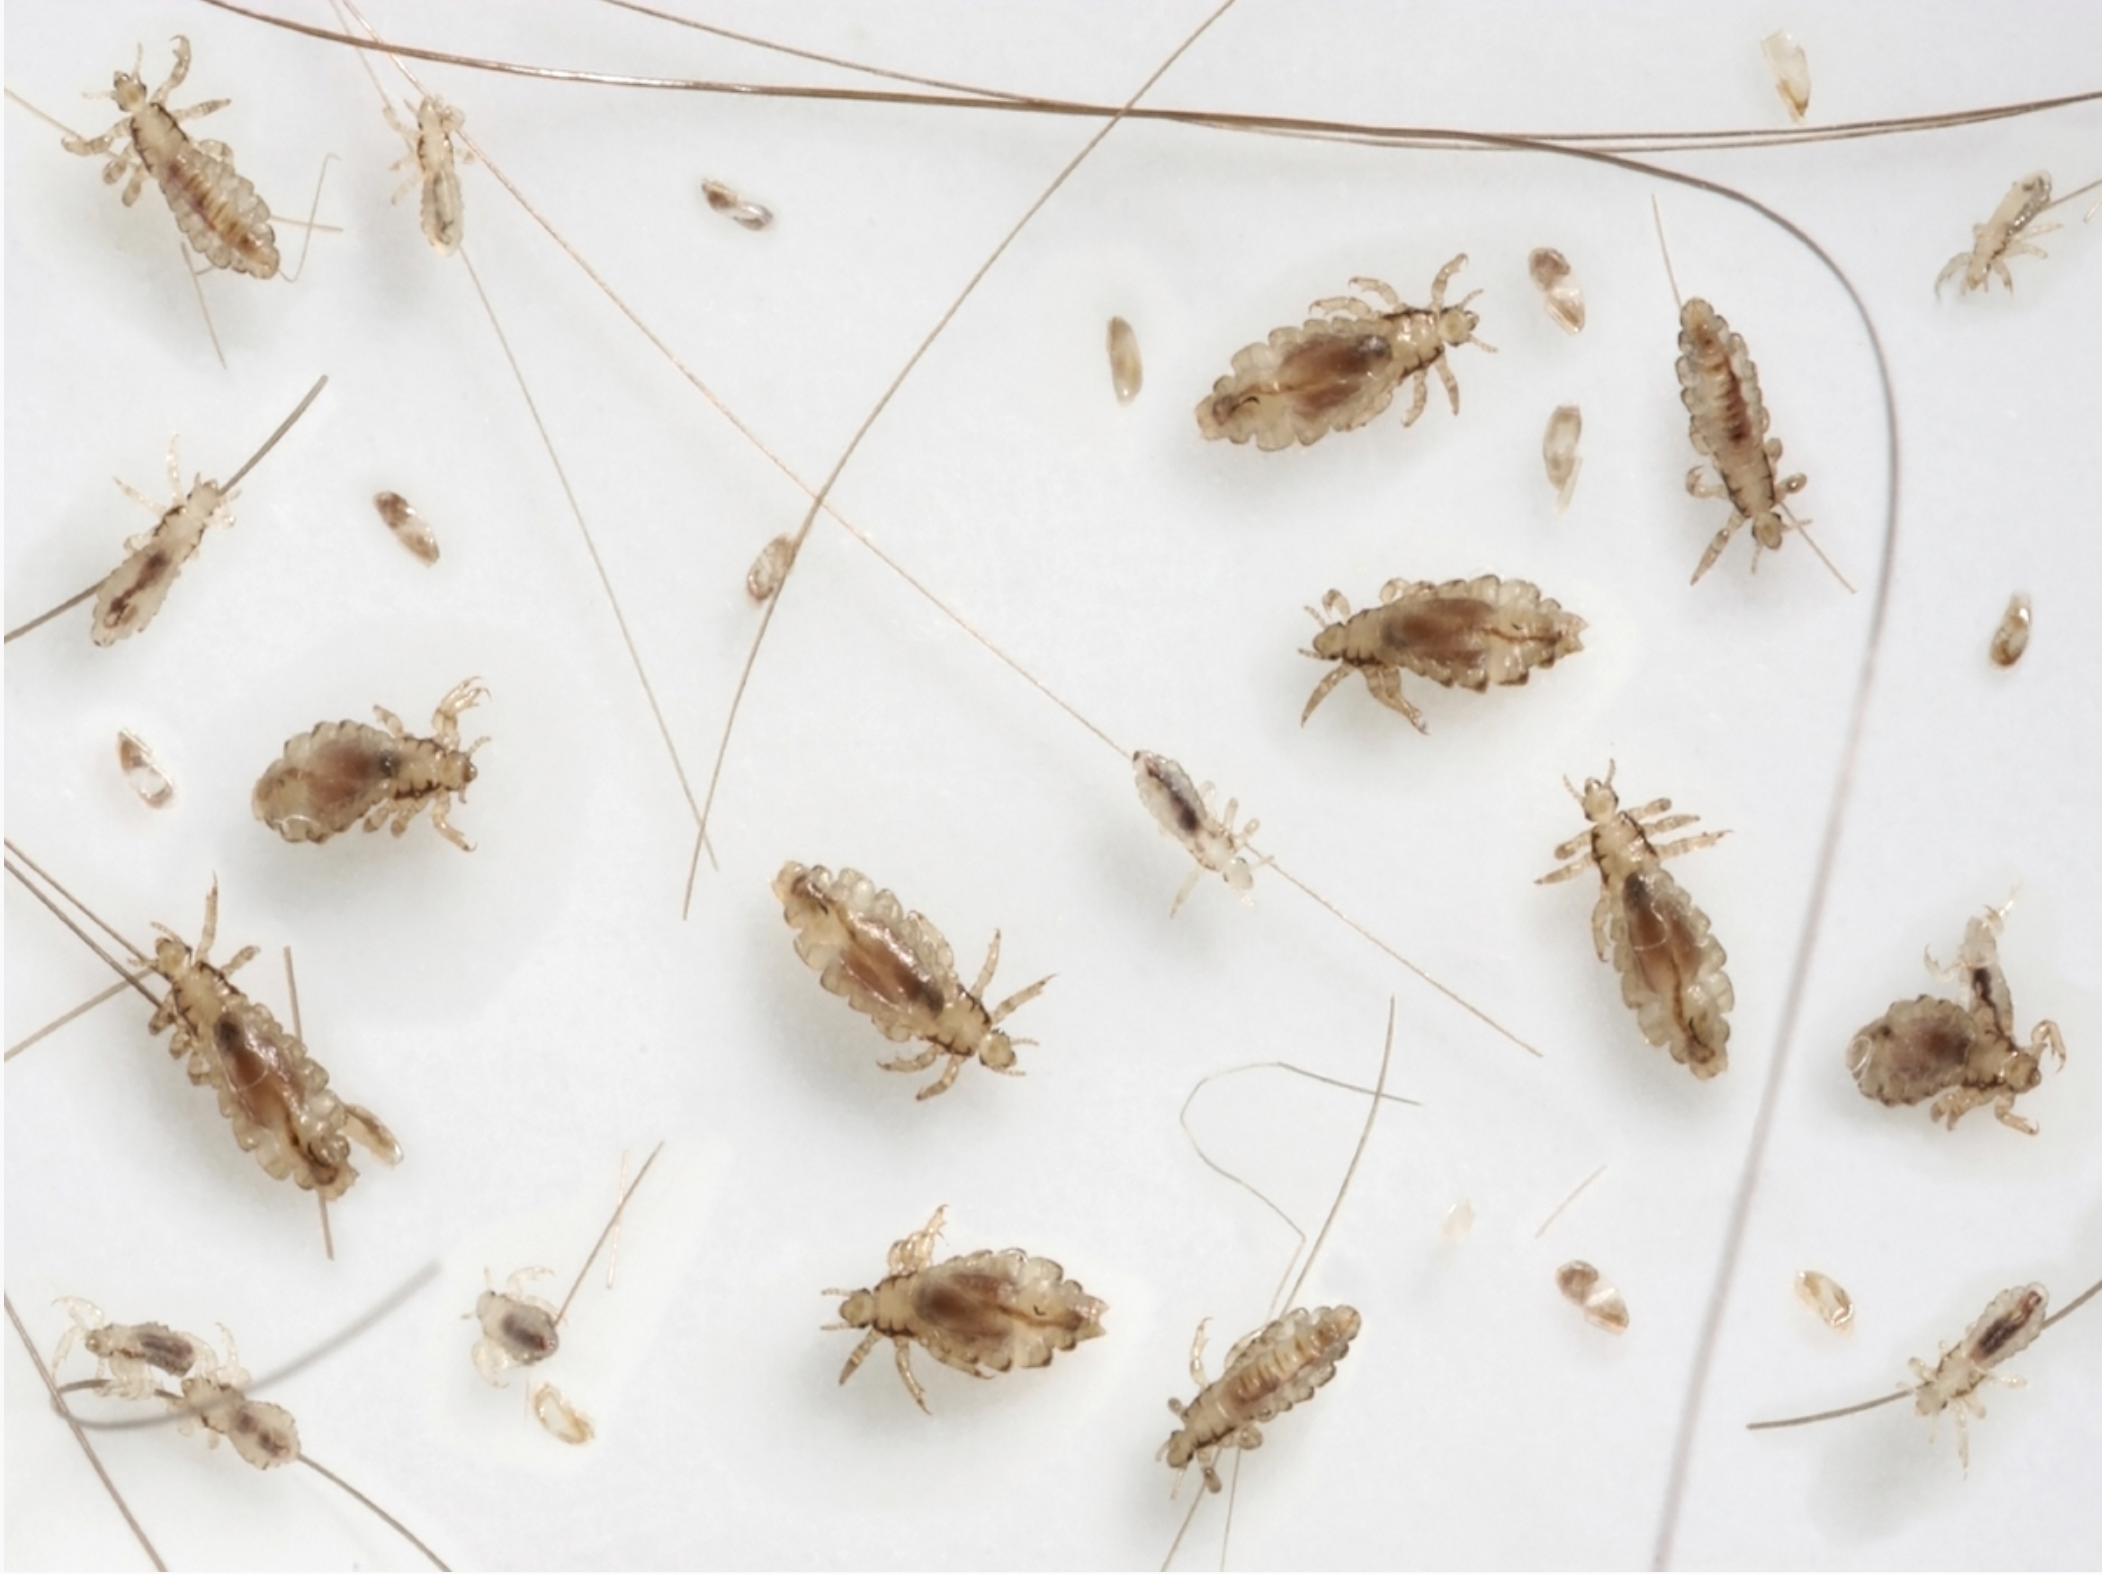 Head Lice Prevention and Treatment - Aantex